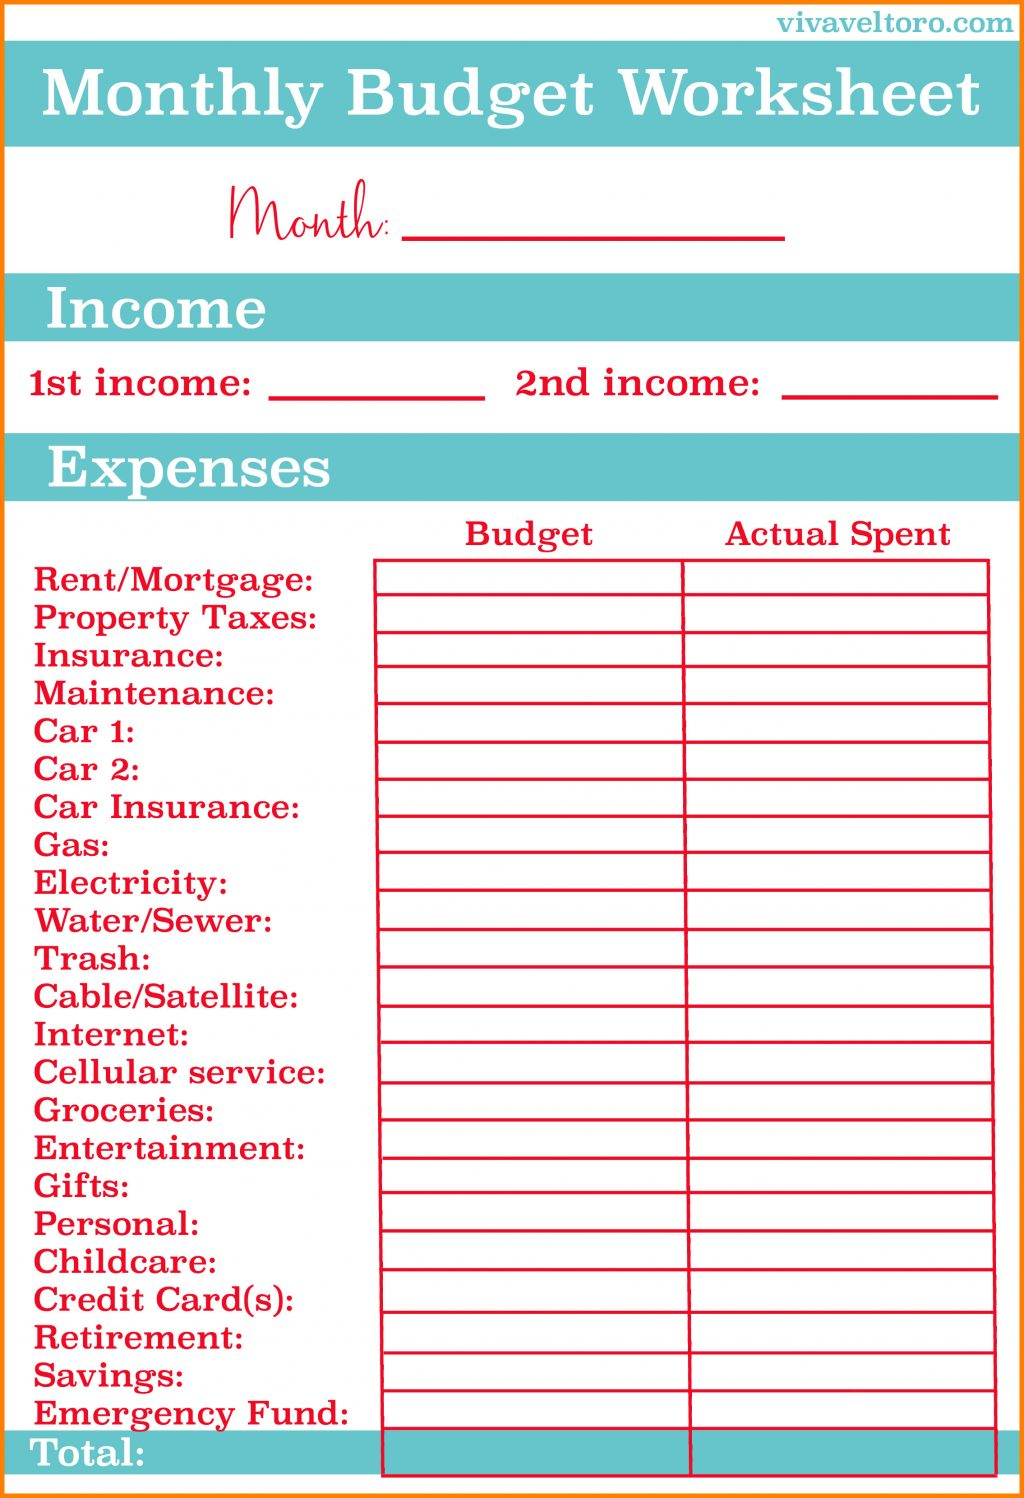 How To Make Your Own Budget Spreadsheet As Online Spreadsheet with Create Your Own Spreadsheet